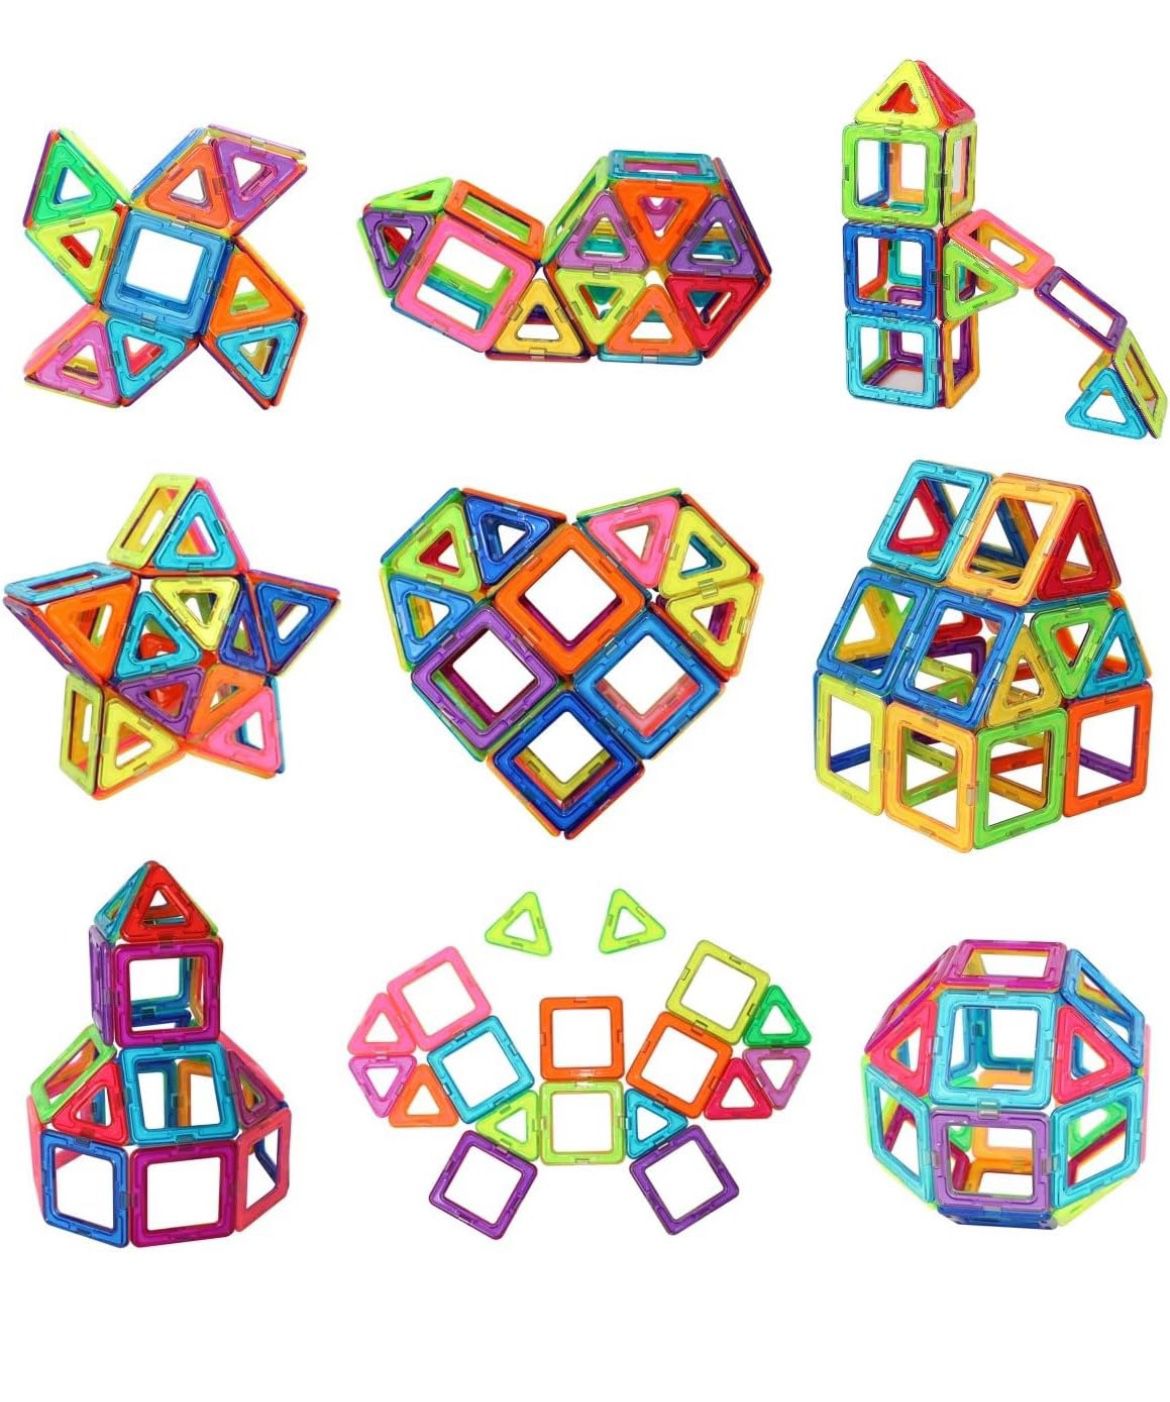 Magnetic Tiles, Building Blocks STEM Toys, Educational Construction Toys Set for Toddlers Learning and Kids Aged 3+